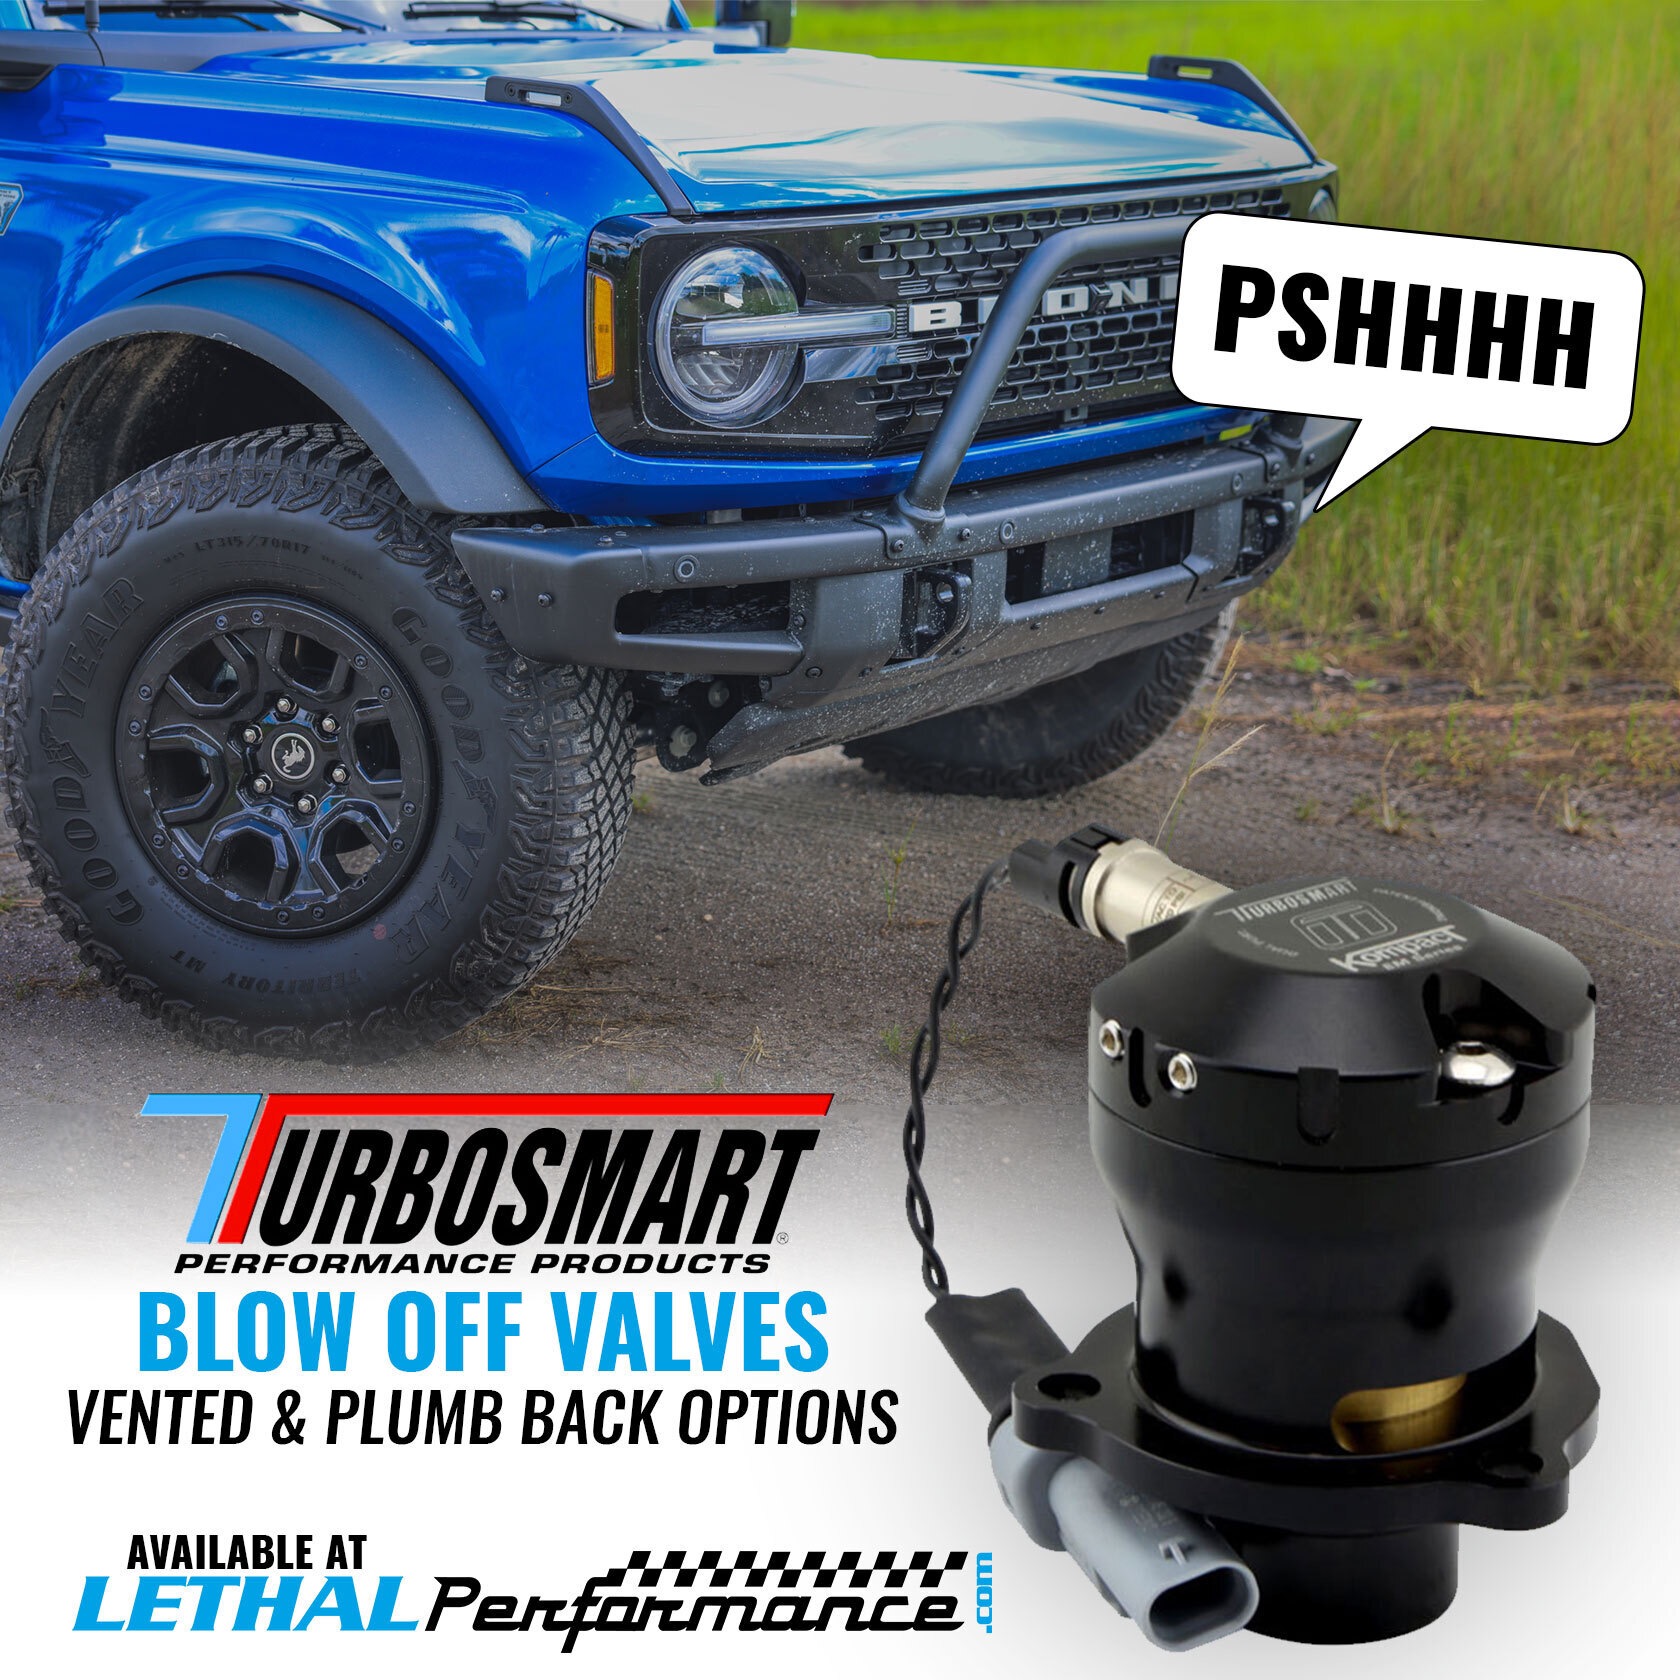 Ford Bronco TURBOSMART Blow Off Valves for your Bronco: NOW AVAILABLE HERE AT LETHAL PERFORMANCE 1638389275640